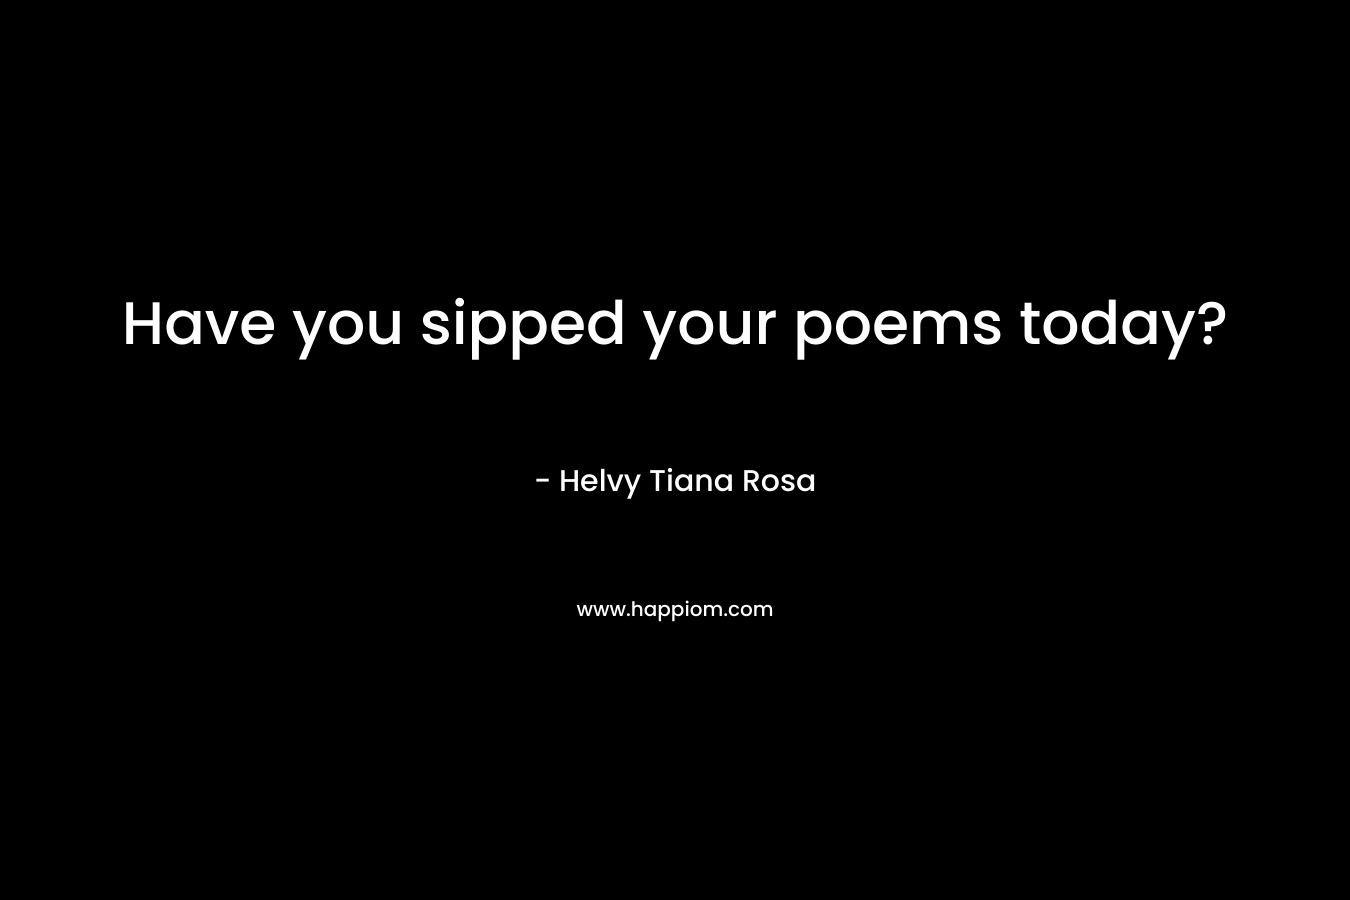 Have you sipped your poems today? – Helvy Tiana Rosa